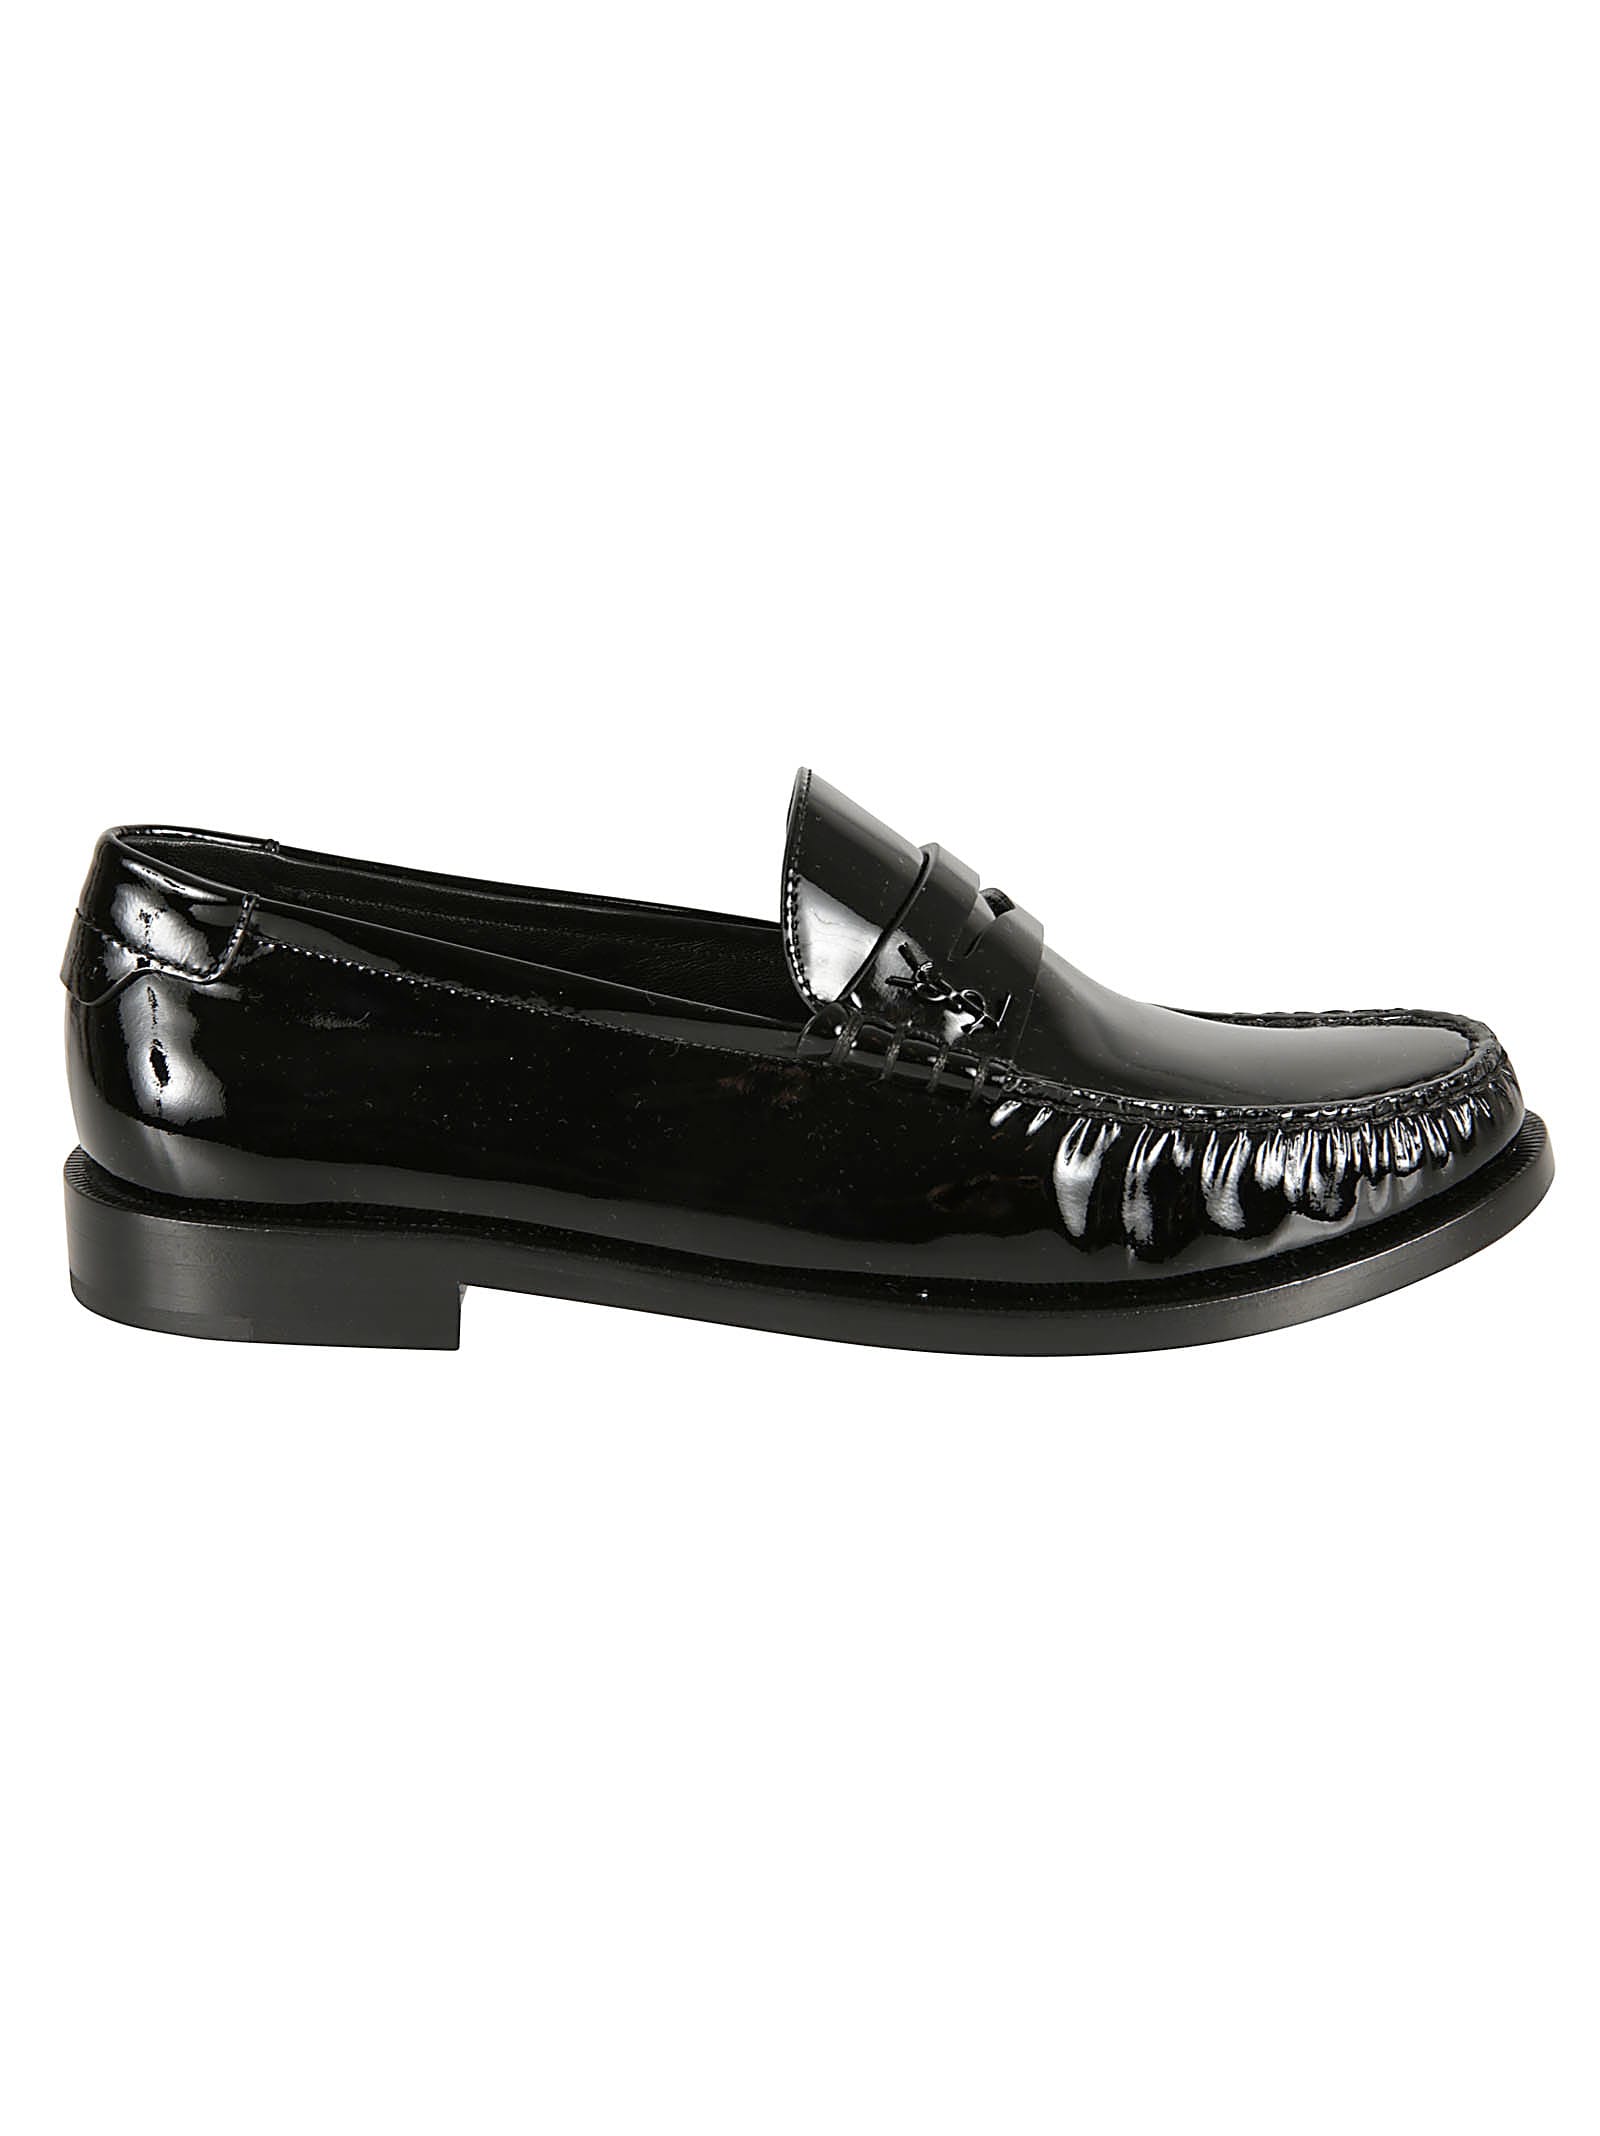 Saint Laurent Shiny Leather Loafers